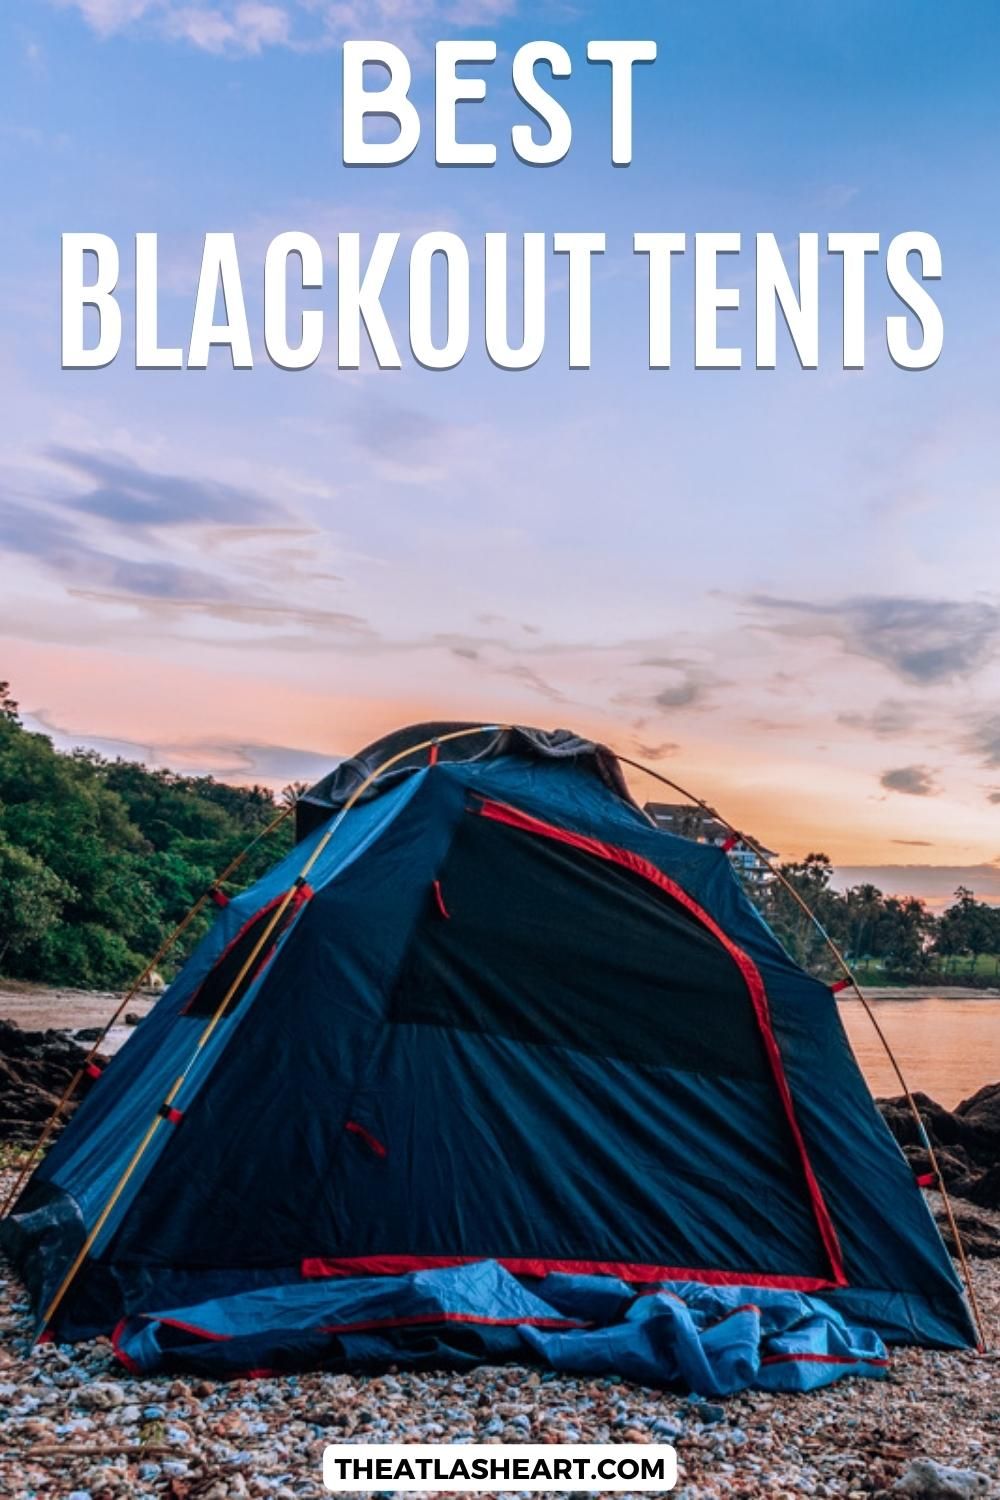 A blackout tent pitched on the banks of a lake with an orange and blue sunrise in the background, and the text overlay, "Best Blackout Tents."